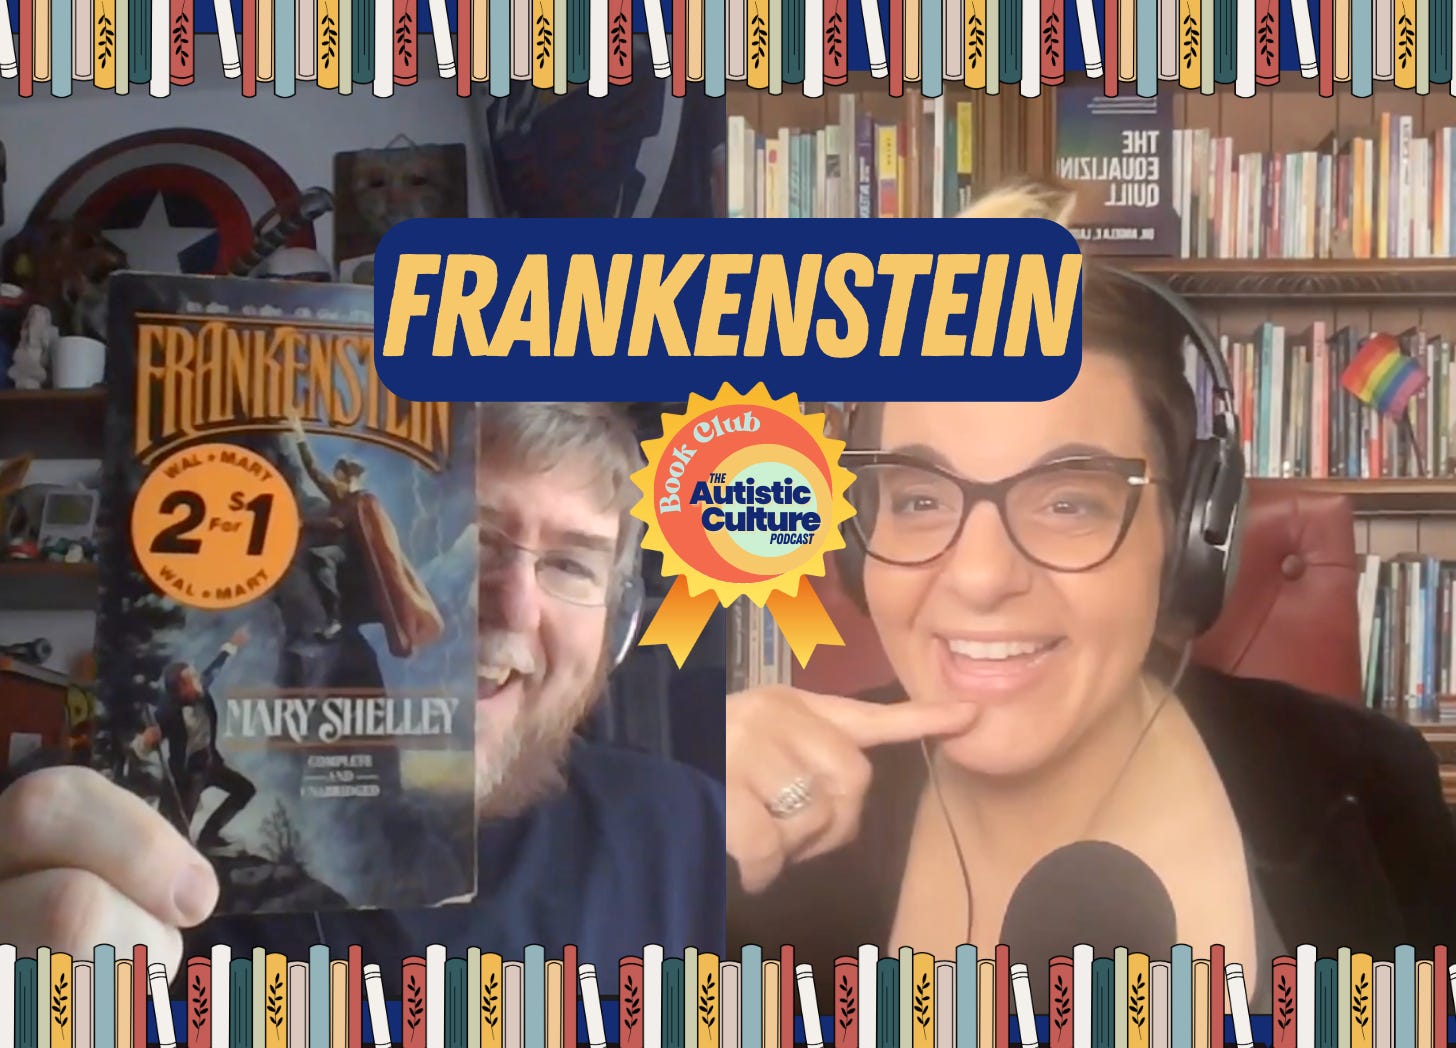 Listen to Autistic podcast hosts discuss: Mary Shelley's Frankenstein. Autistic Book Club | Matt and Angela discuss how the classic novel relates to Autistic culture.